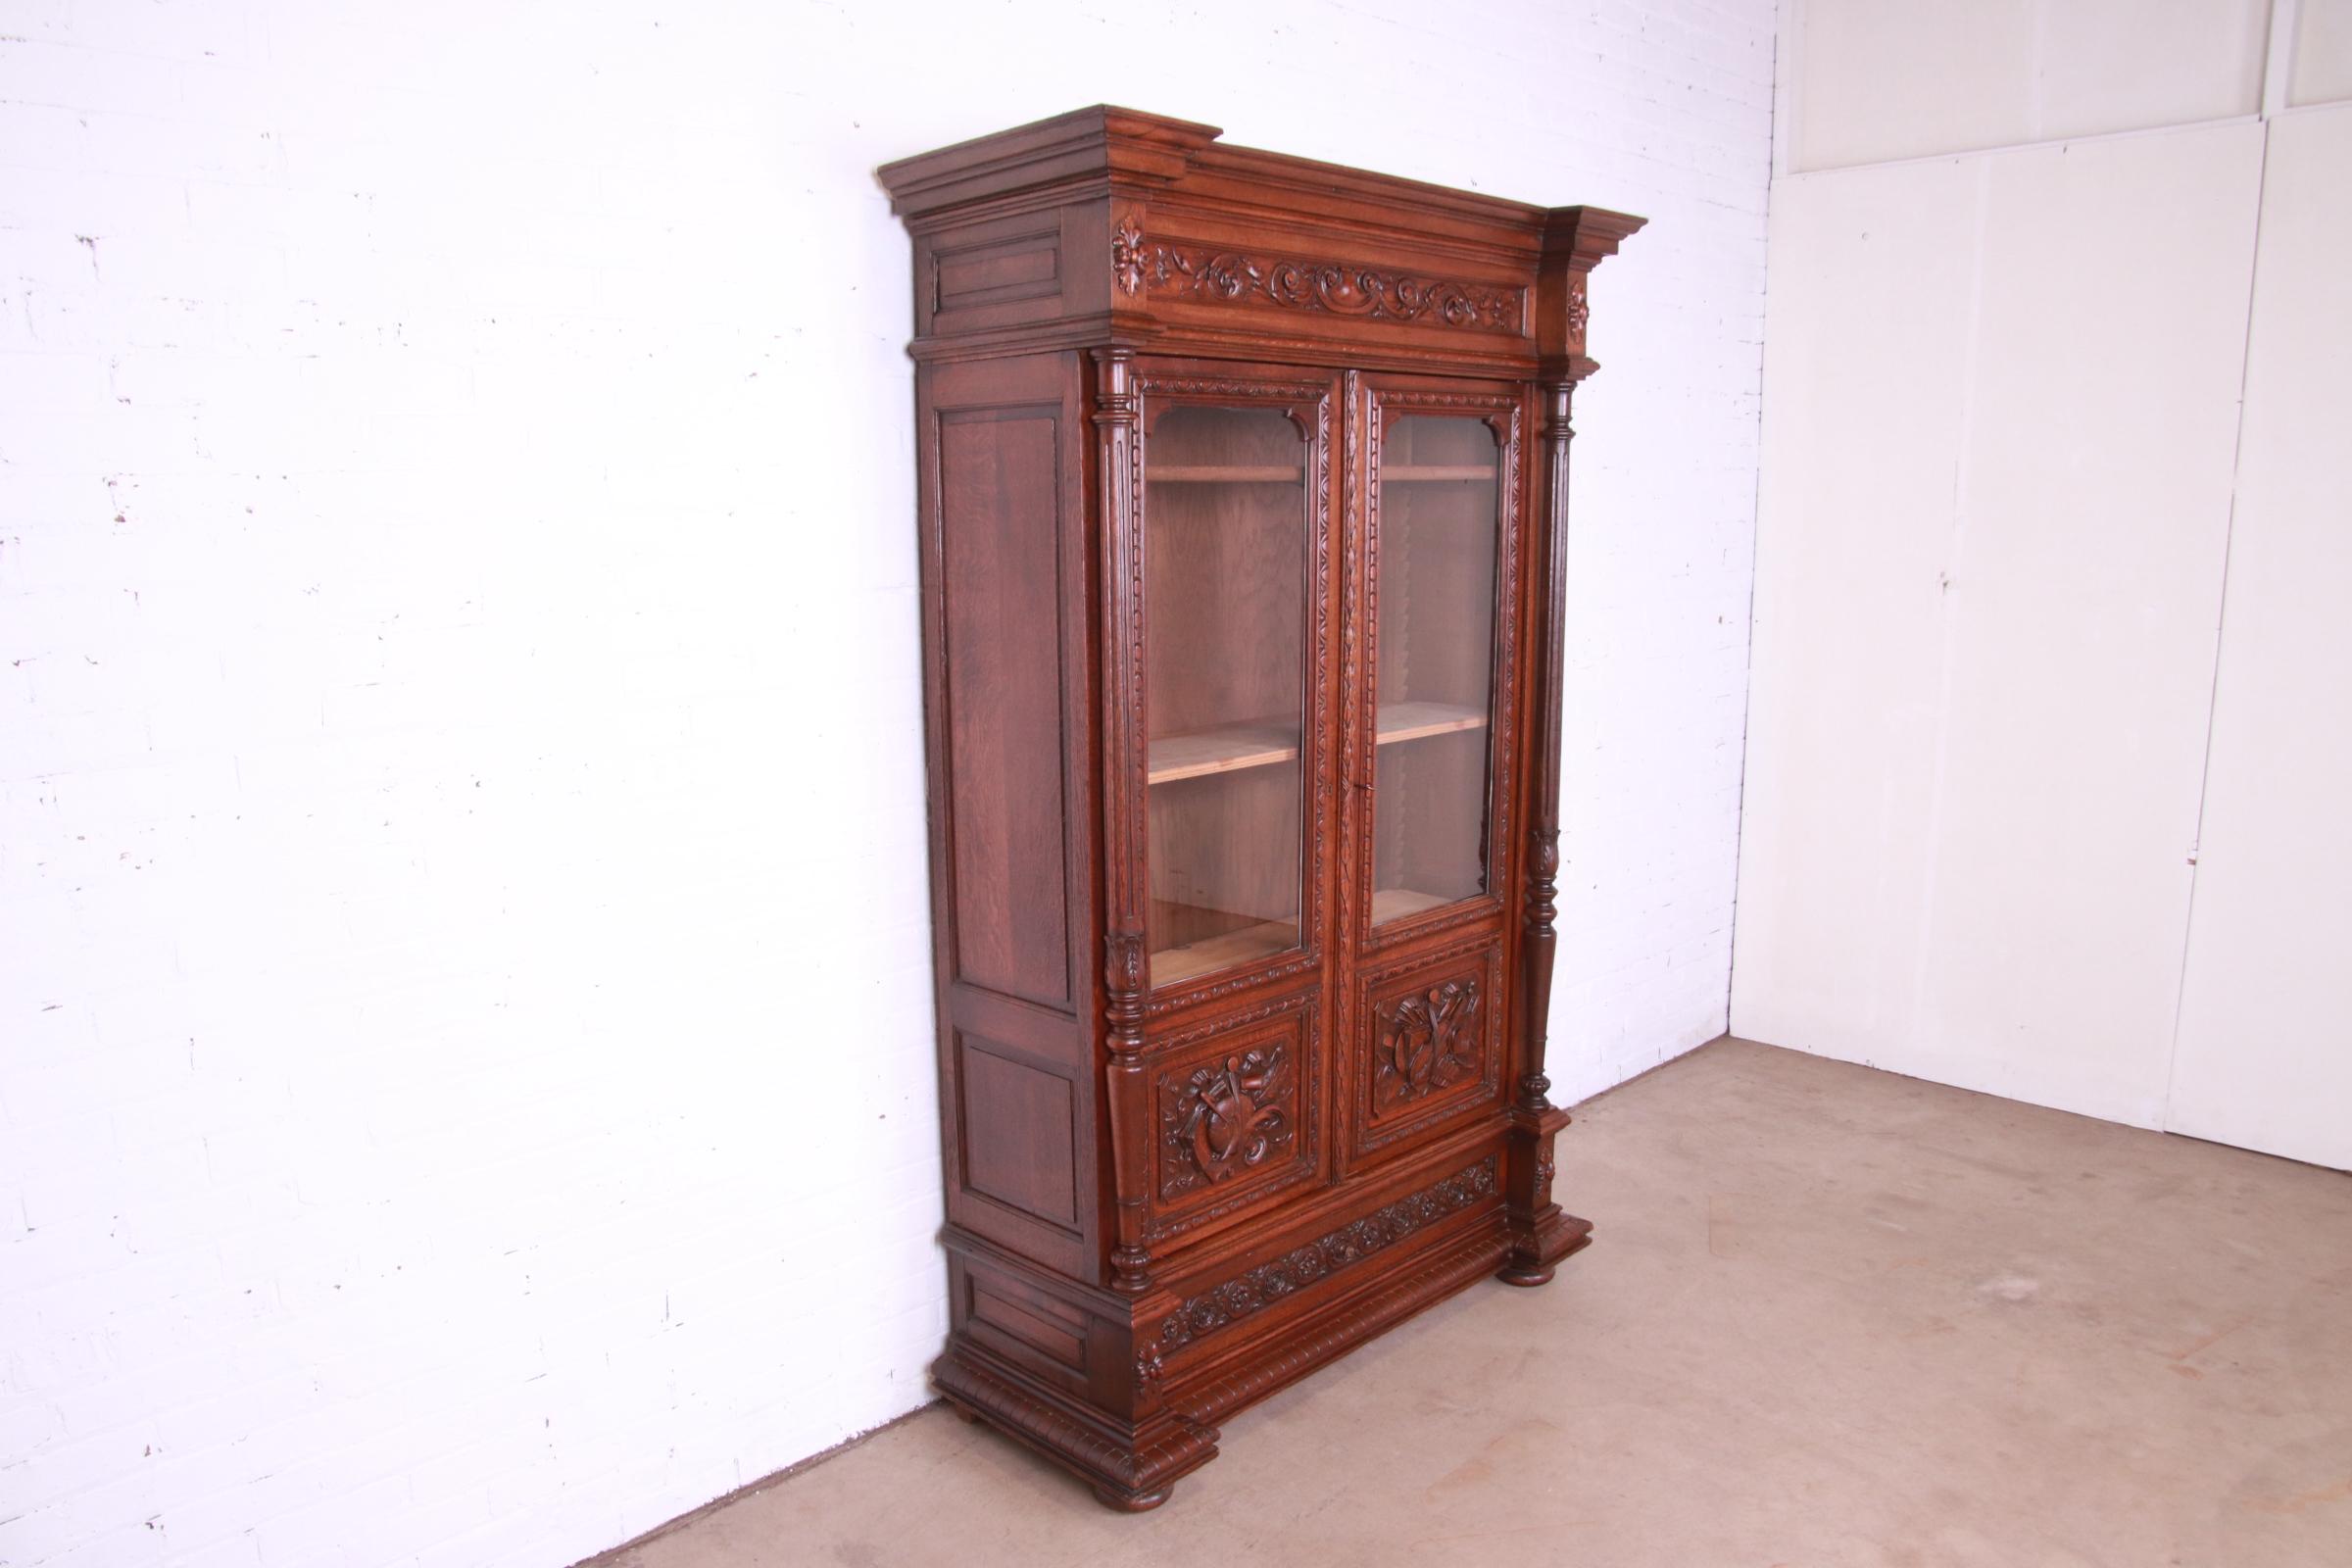 20th Century Antique French Renaissance Revival Carved Oak Bibliotheque Bookcase Cabinet